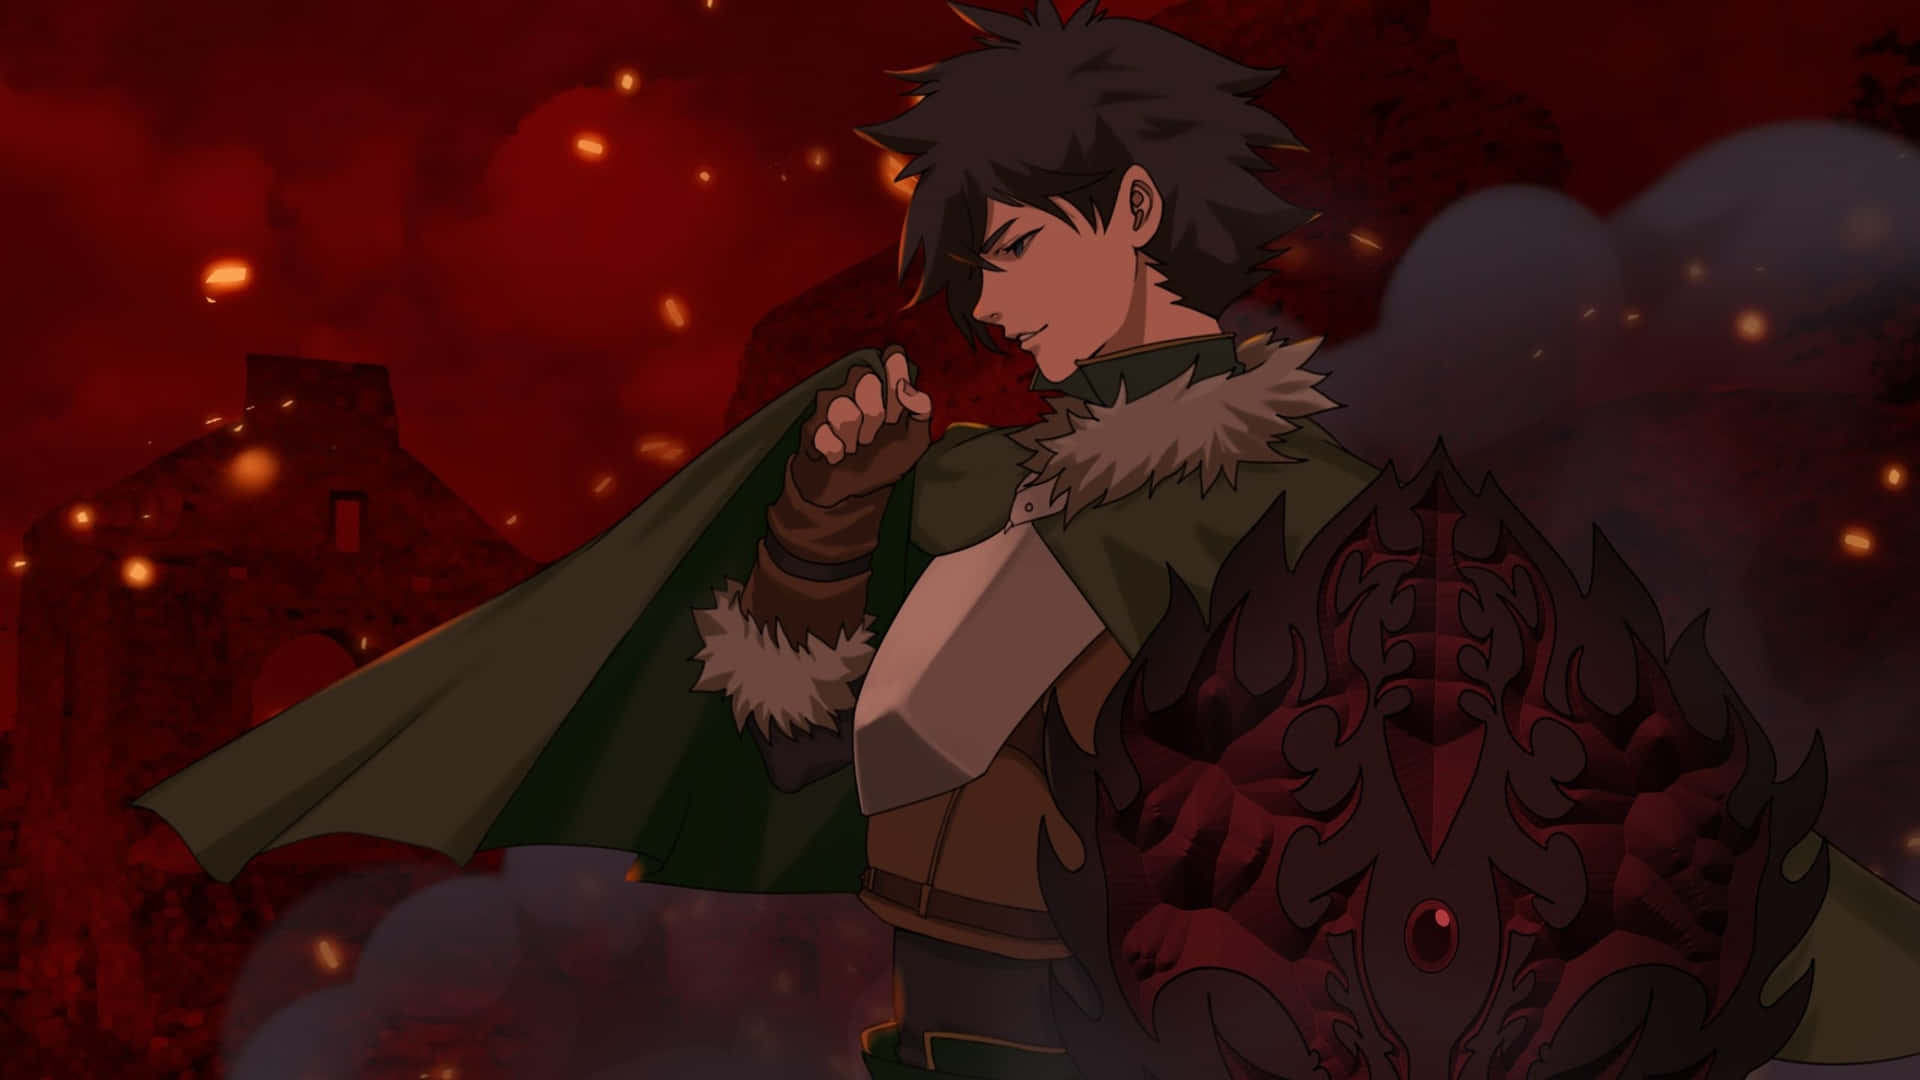 Naofumi Iwatani, the Shield Hero, stands with his allies in a captivating scene from The Rising of the Shield Hero anime series.